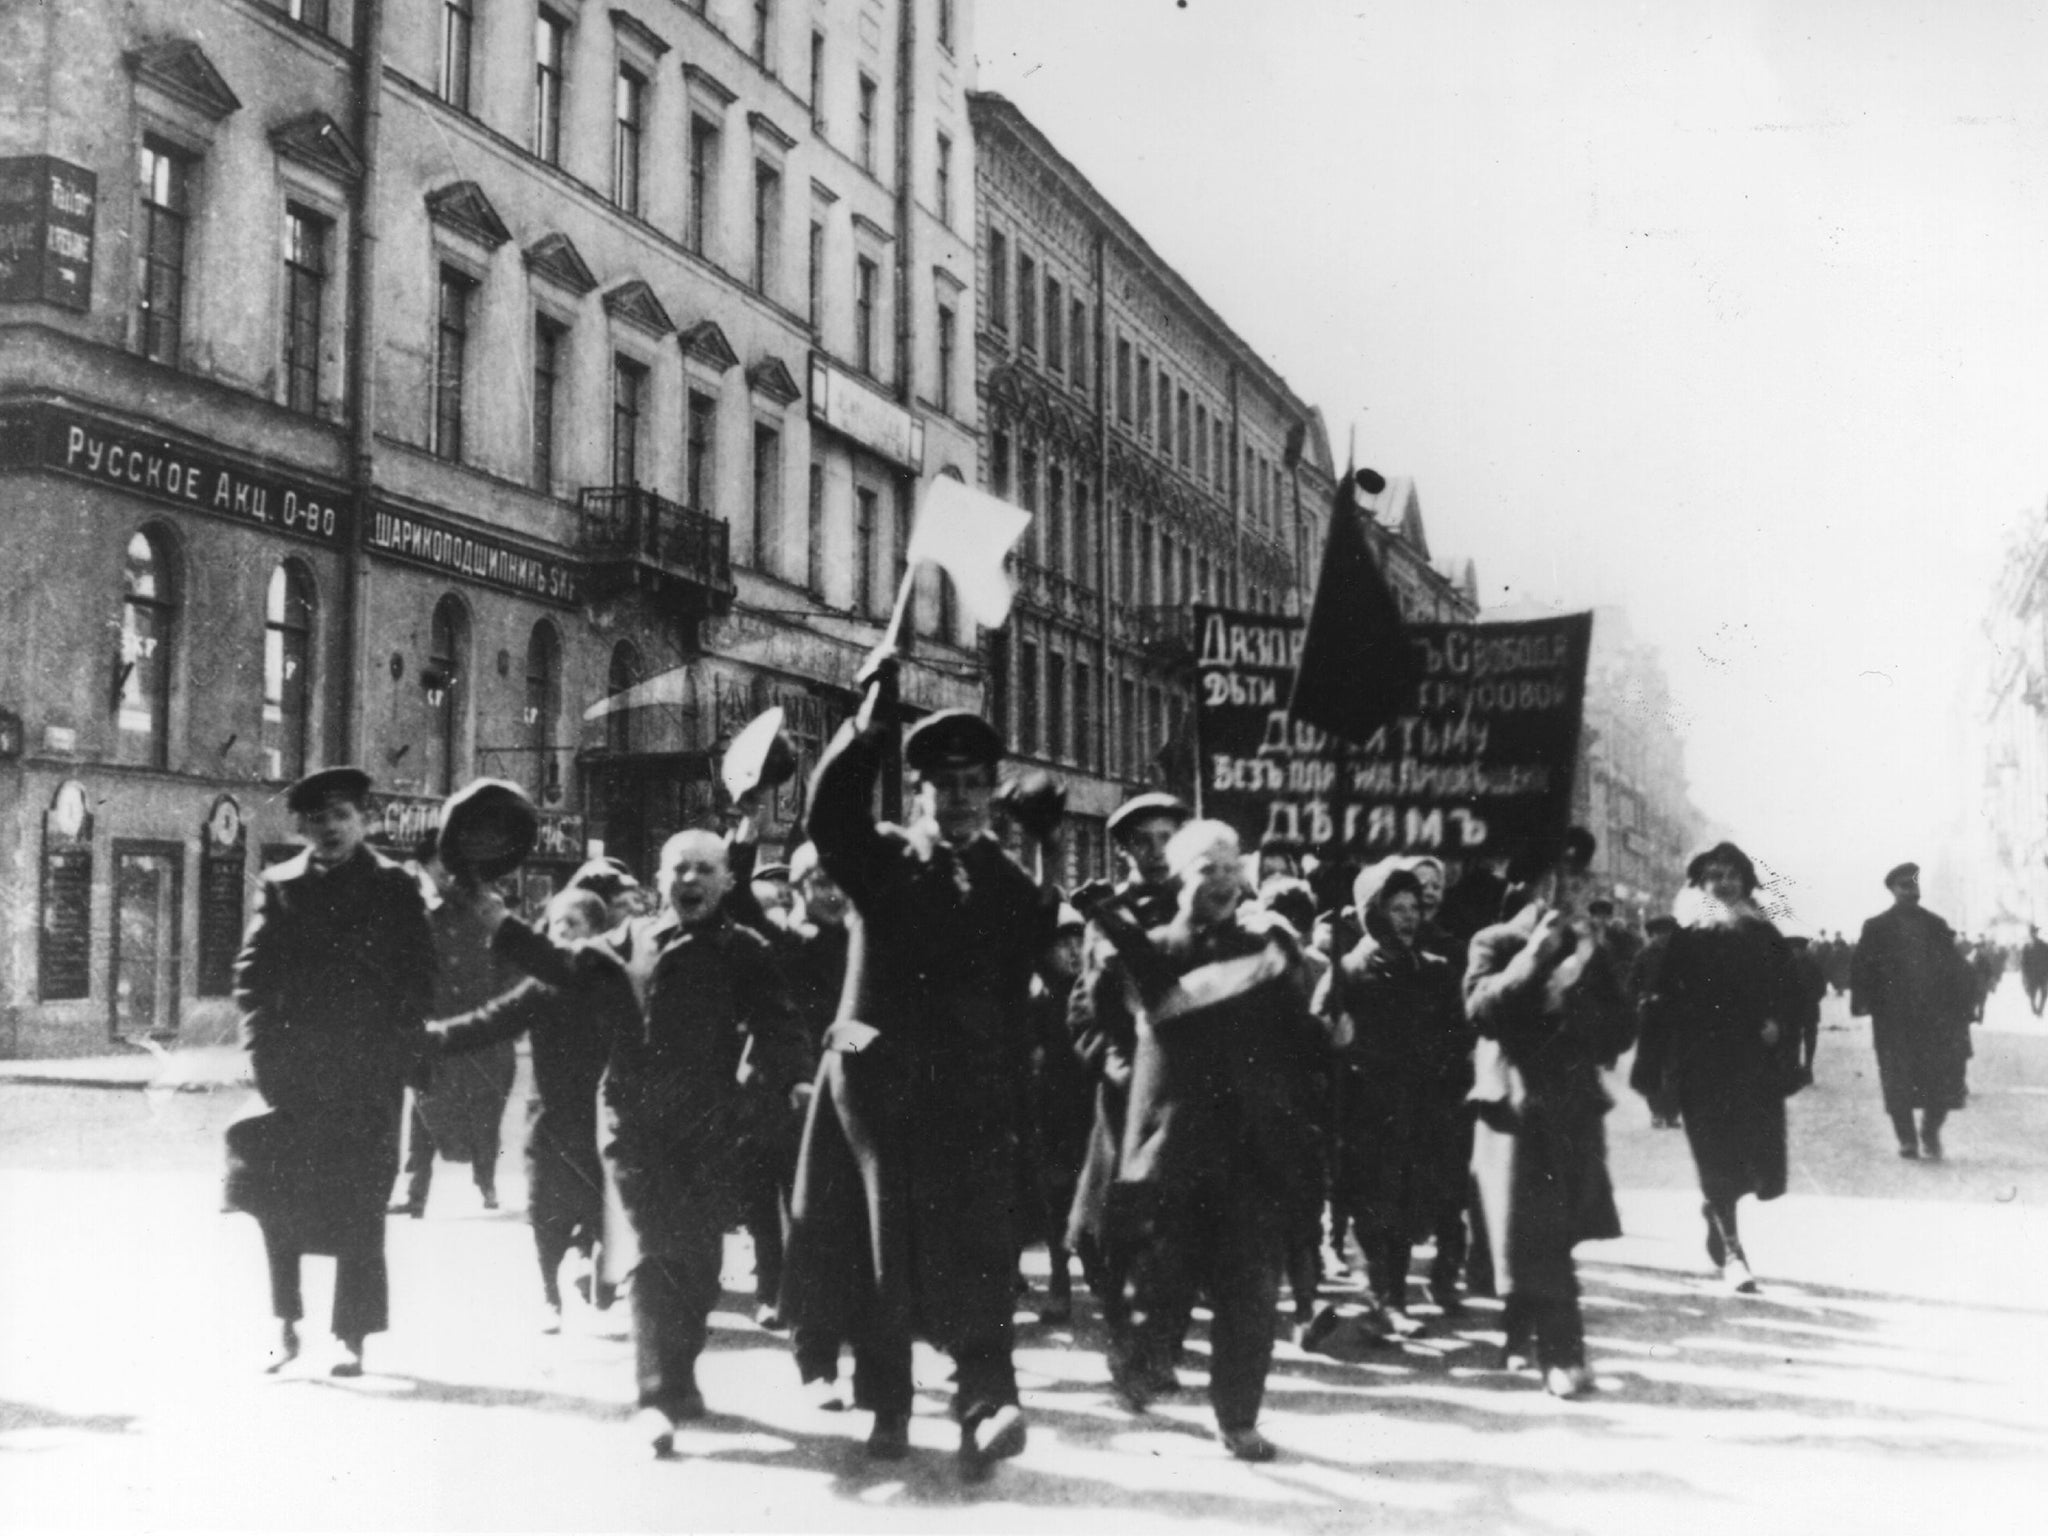 Schoolboys march in protest through Petrograd during the Russian revolution of 1917